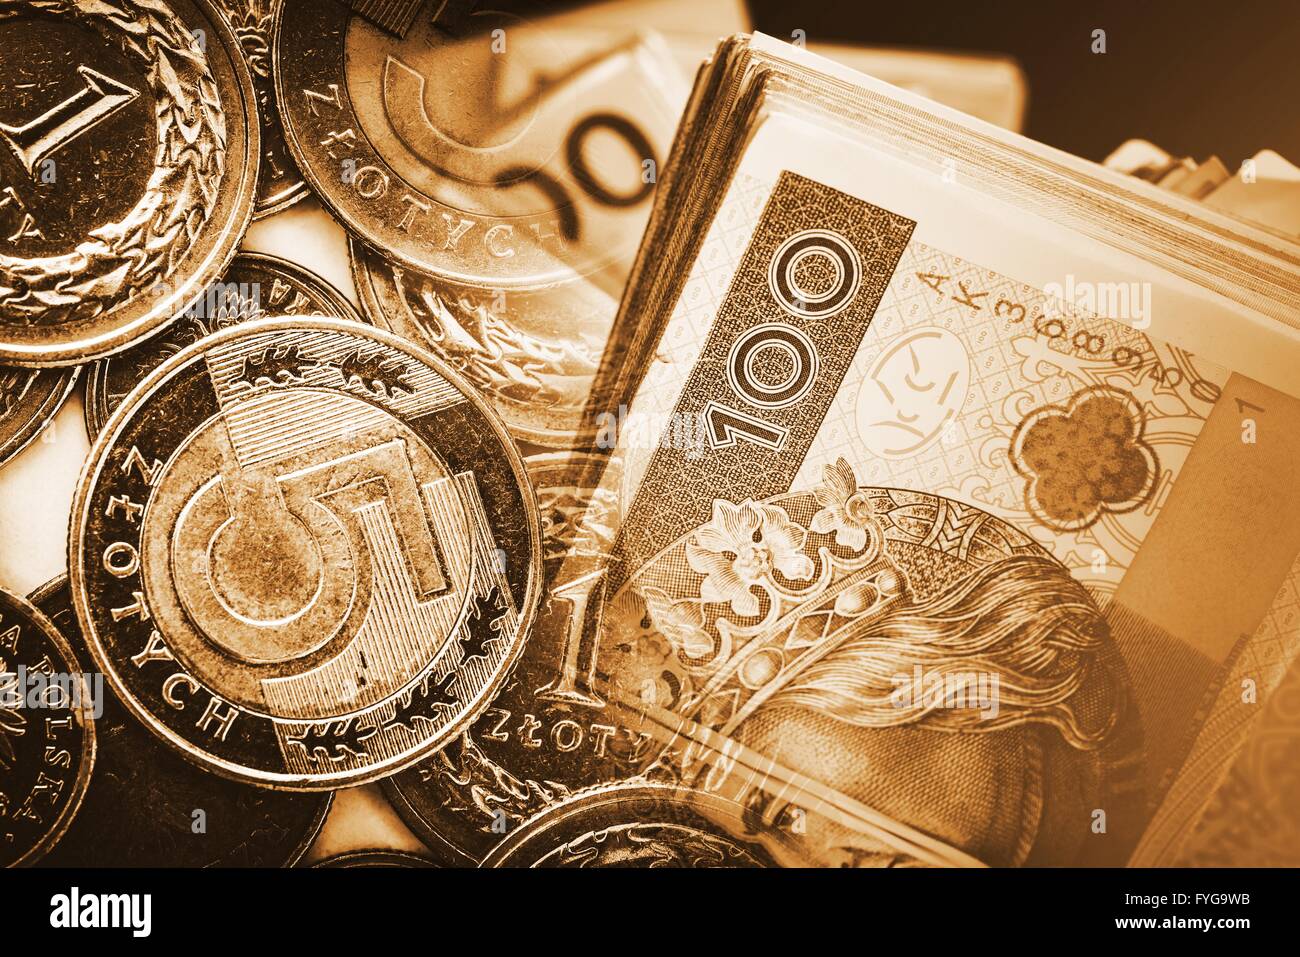 Polish Zloty Trading Financial Concept with Blended Coins and Banknotes Photos. Stock Photo